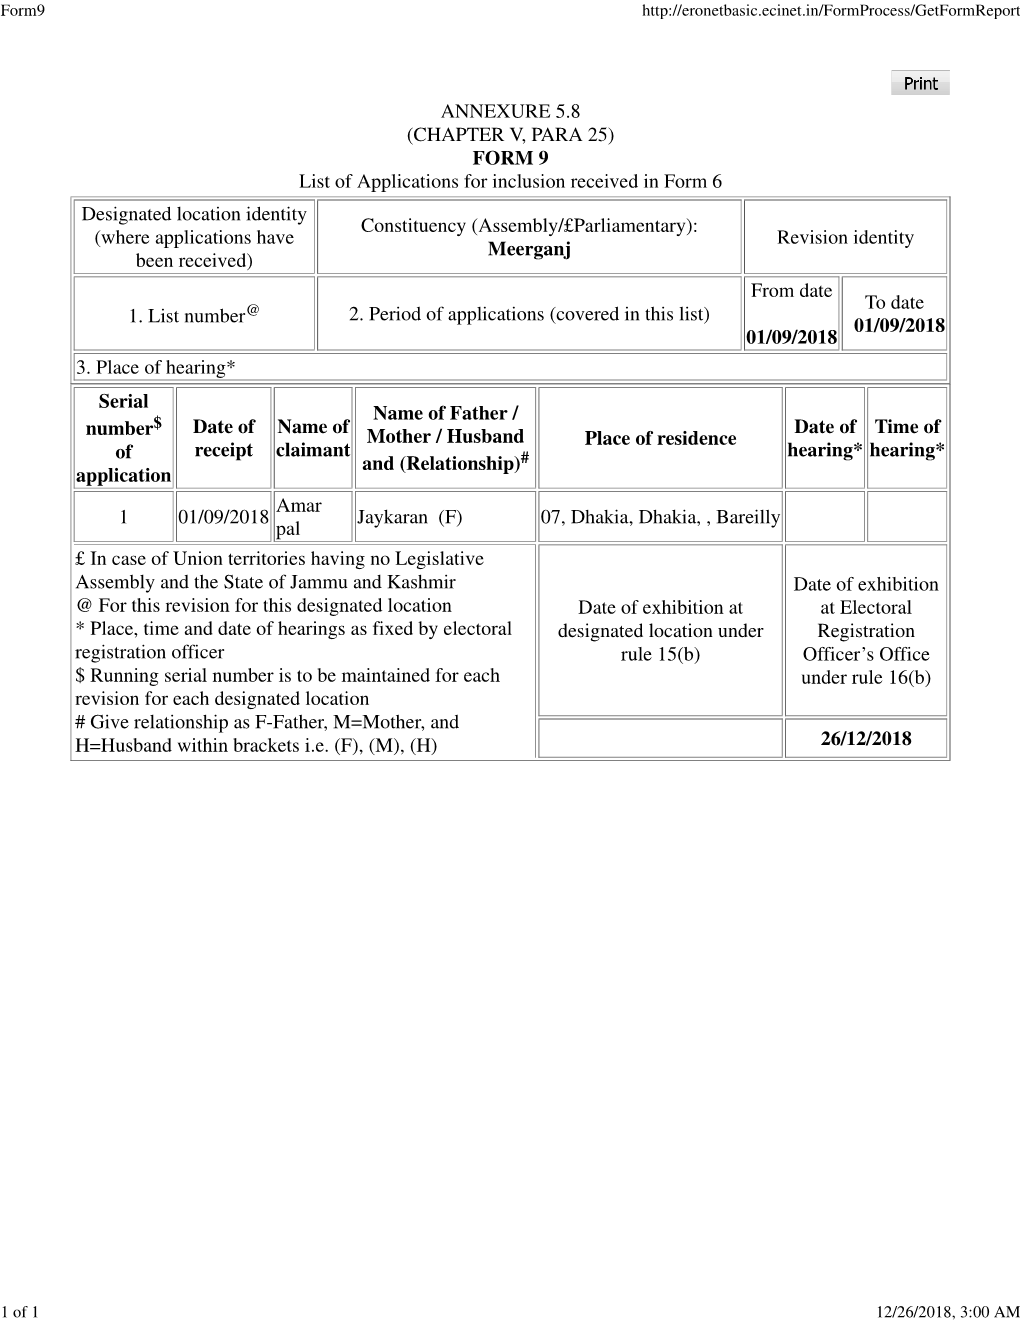 ANNEXURE 5.8 (CHAPTER V, PARA 25) FORM 9 List of Applications For